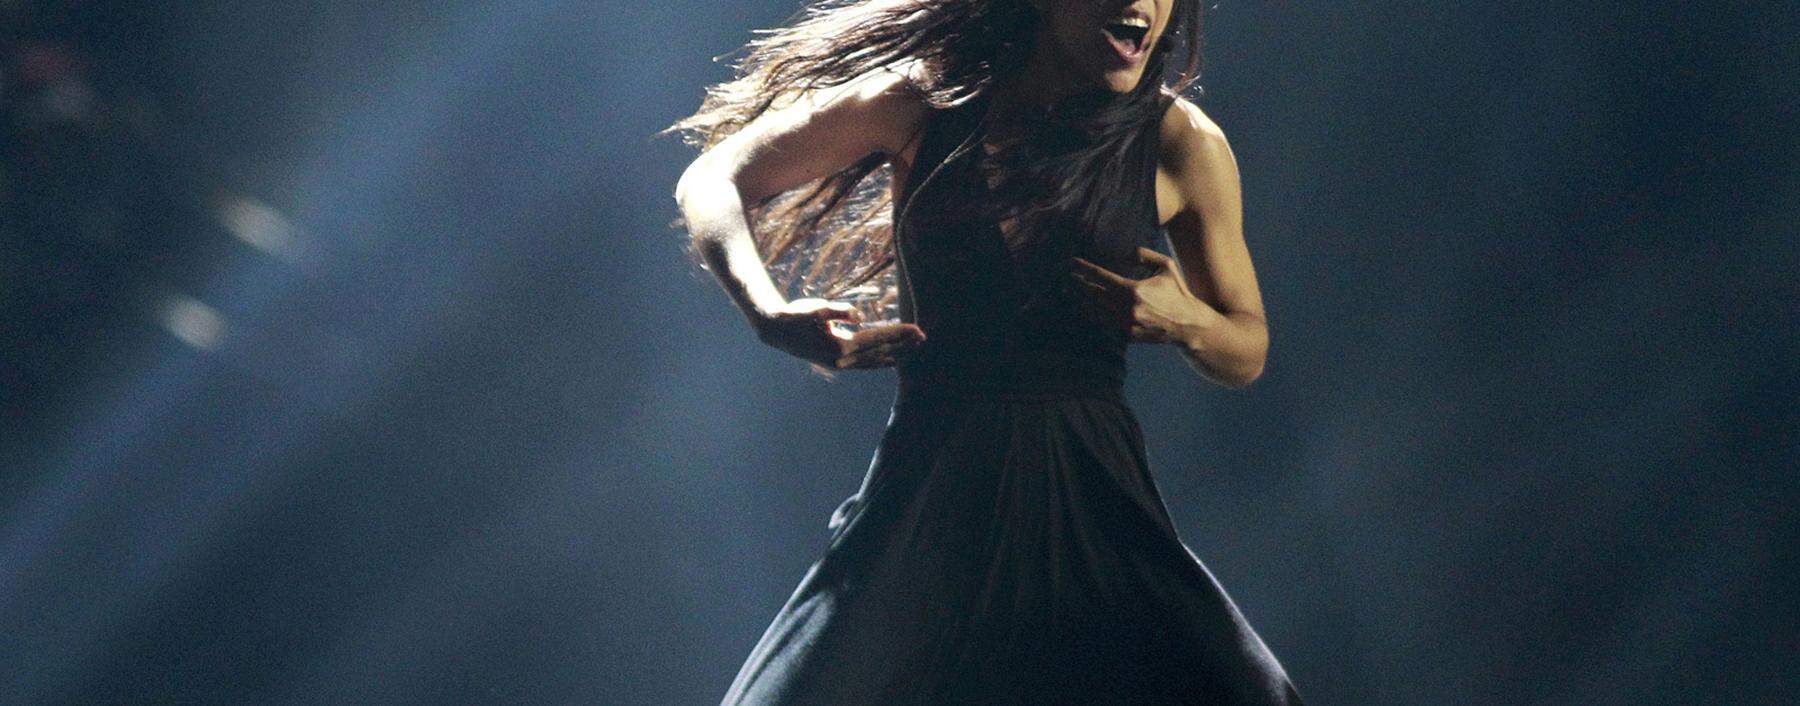 Loreen of Sweden performs her song ´Euphoria´ after winning the Eurovision song contest in Baku